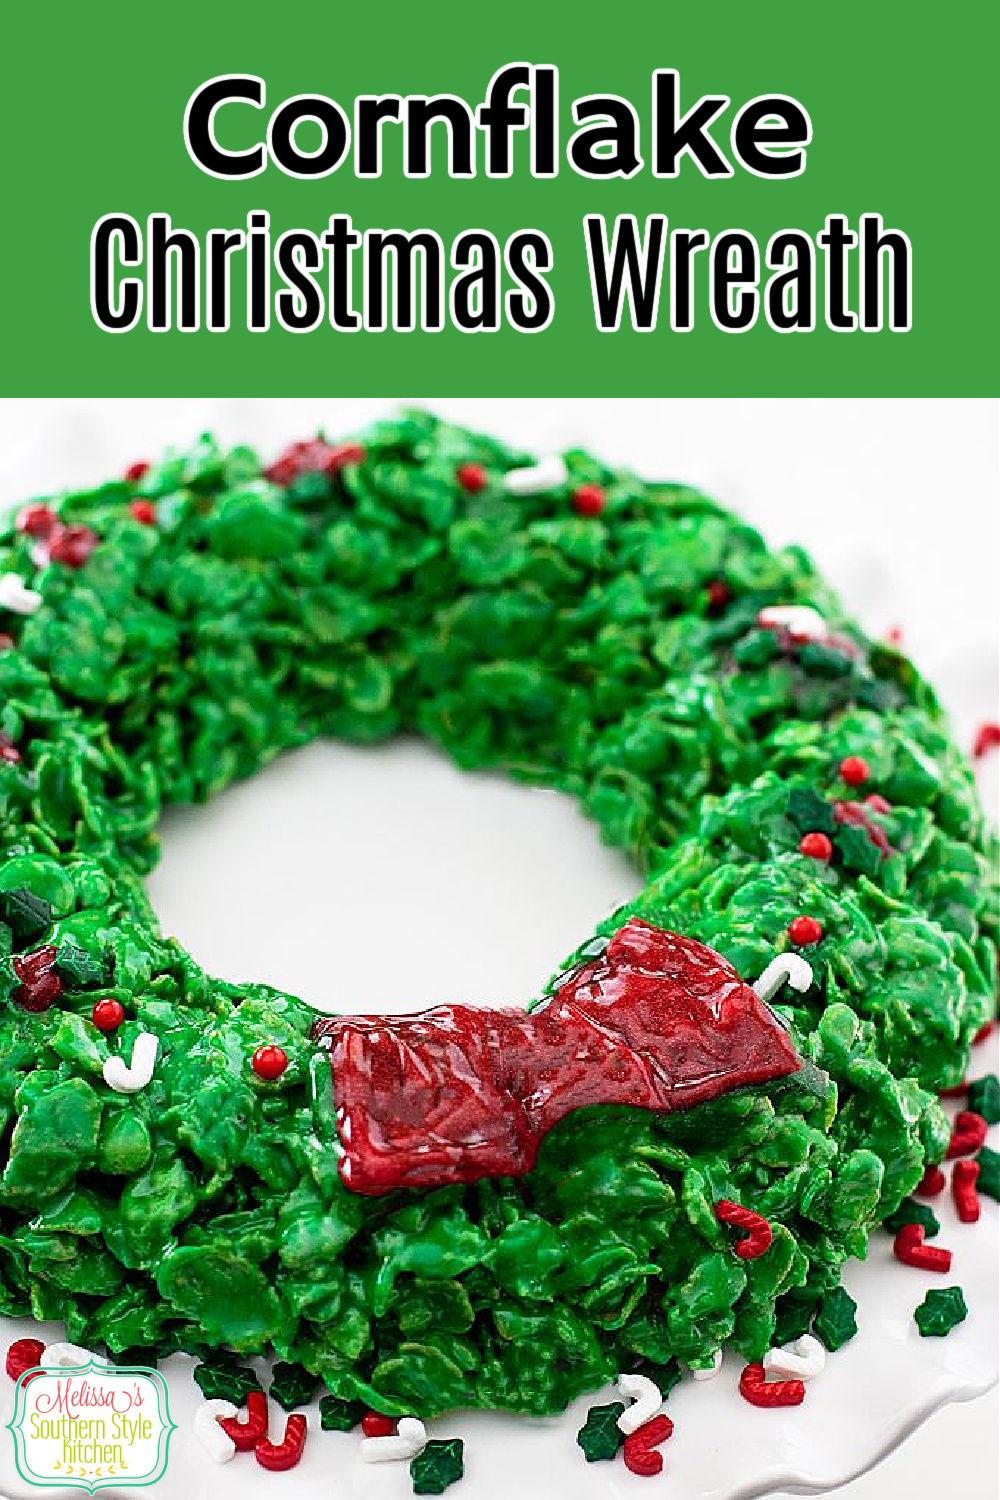 These easy Cornflake Christmas Wreath is a delicious kid-friendly project that will get the entire family involved in making #cornflakewreaths #christmaswreaths #cornflakes #cornflaketreats #marshmallows #desserts #christmas #christmasdesserts #kidfriendly #dessertfoodrecipes #southernfood #southernrecipes